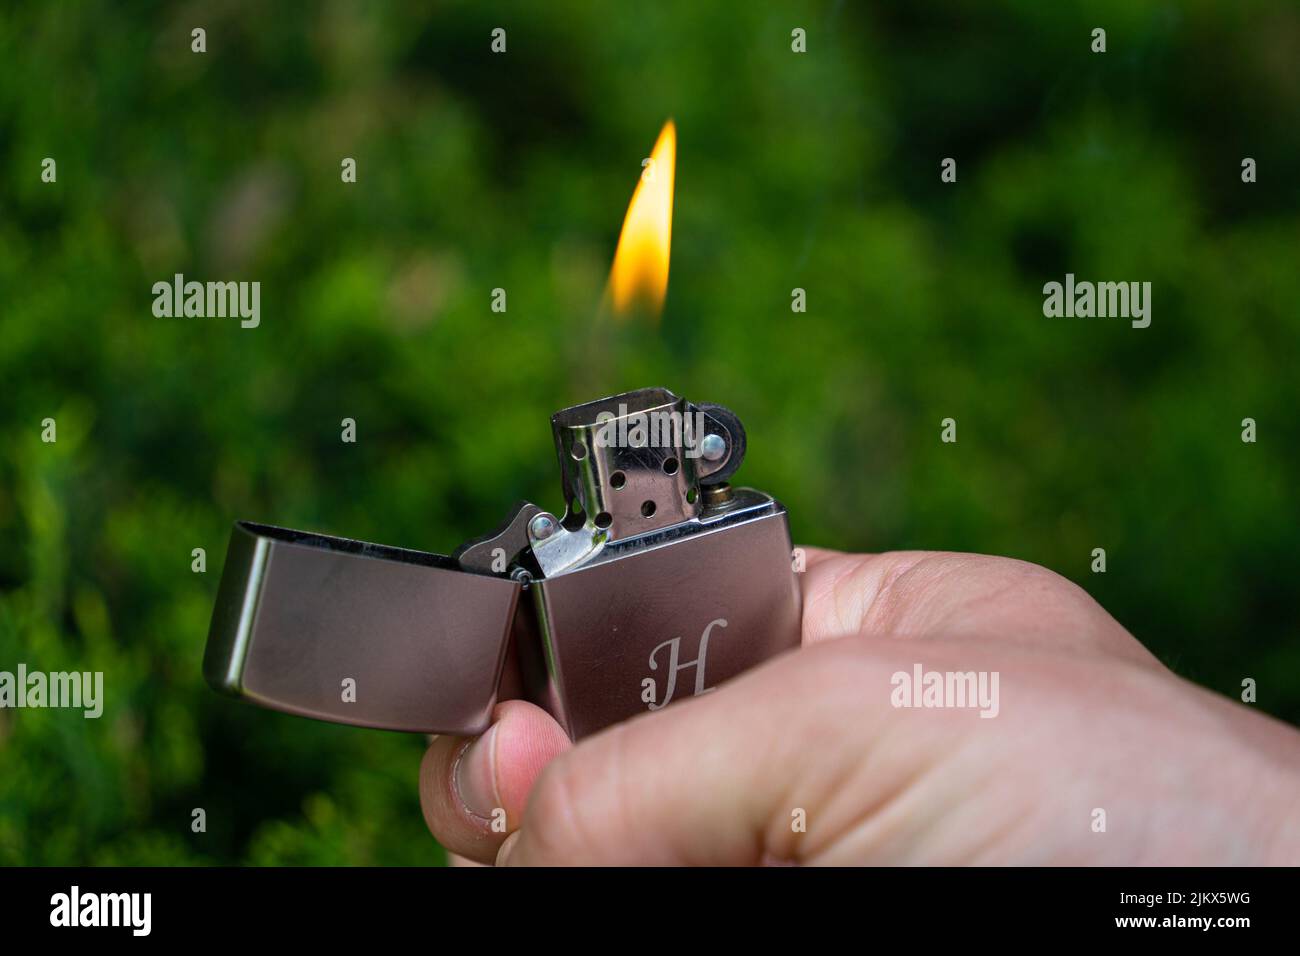 Budapest, Hungary - May 04 2022: Fancy metal cigarette lighter with flame being held in a white hand close up Stock Photo